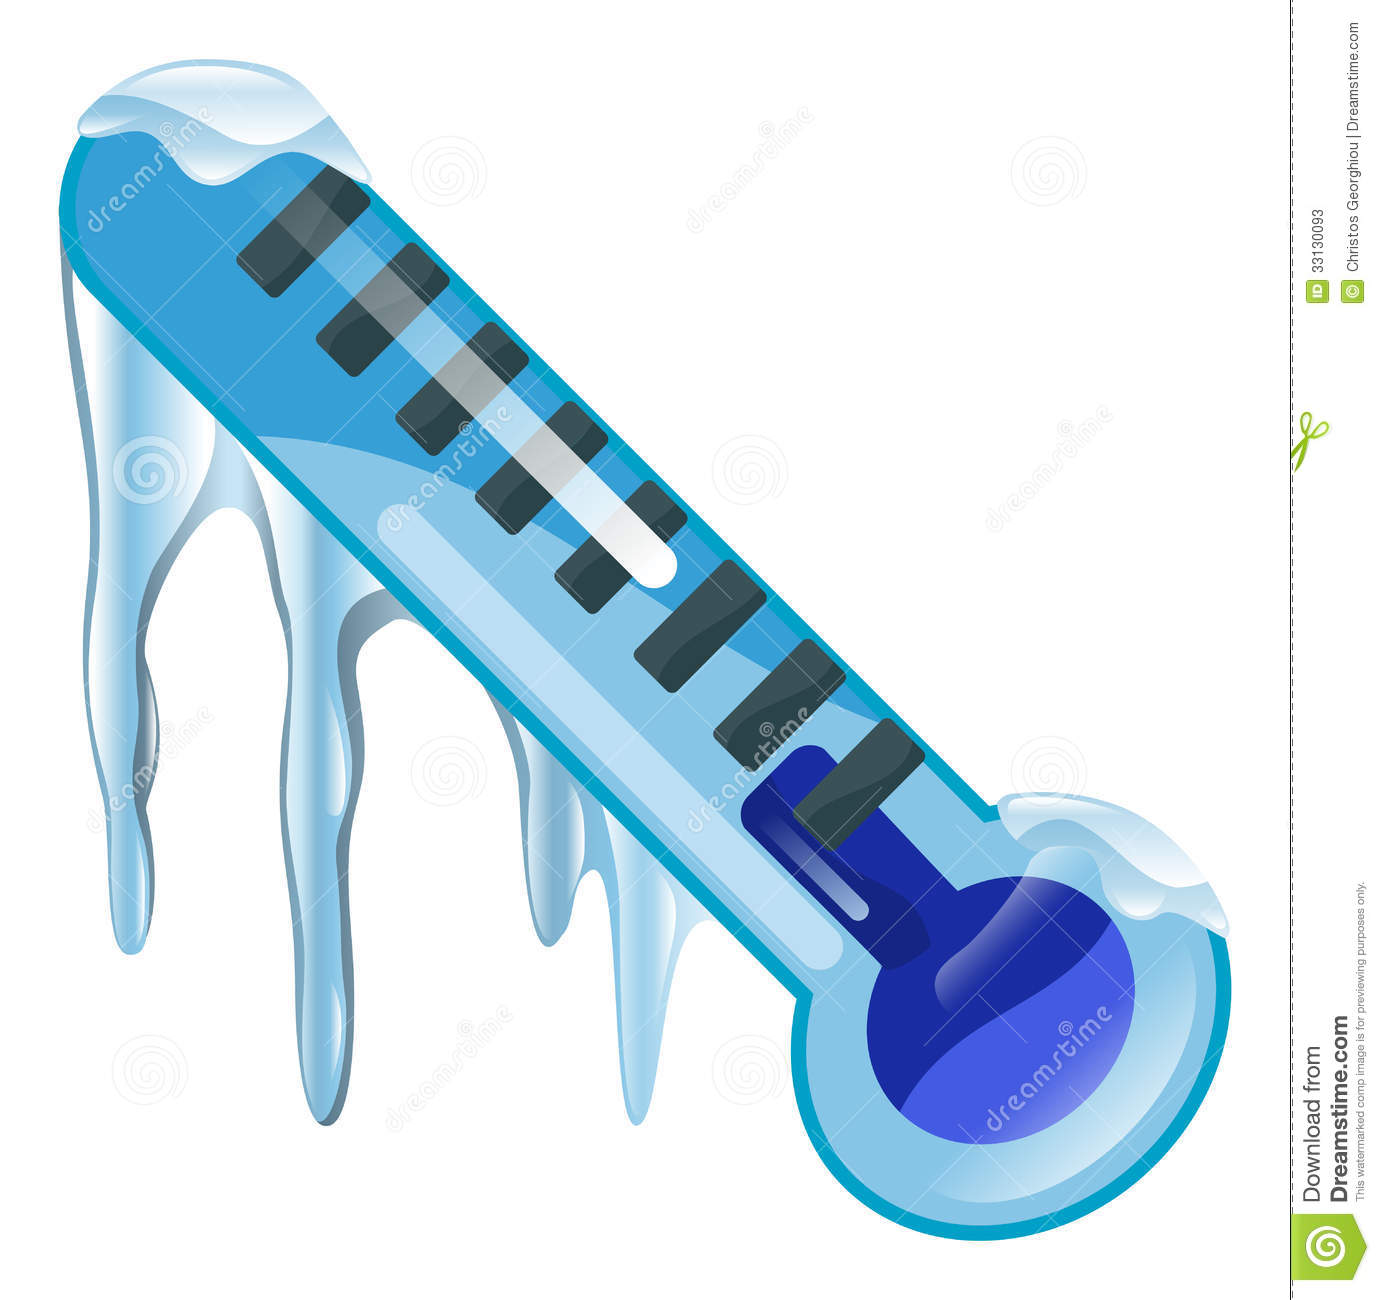 Freezing Cold Thermometer Icon Stock Photos   Image  33130093